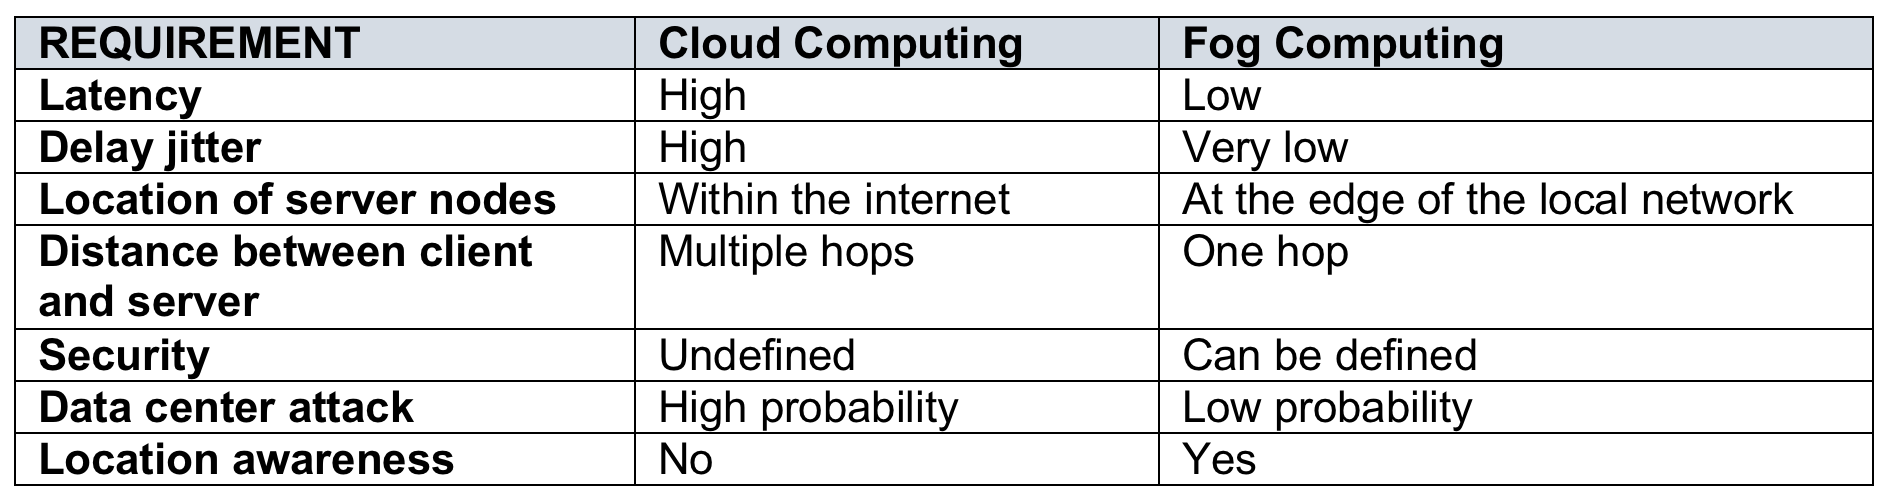 cloud computing and fog computing requirements table